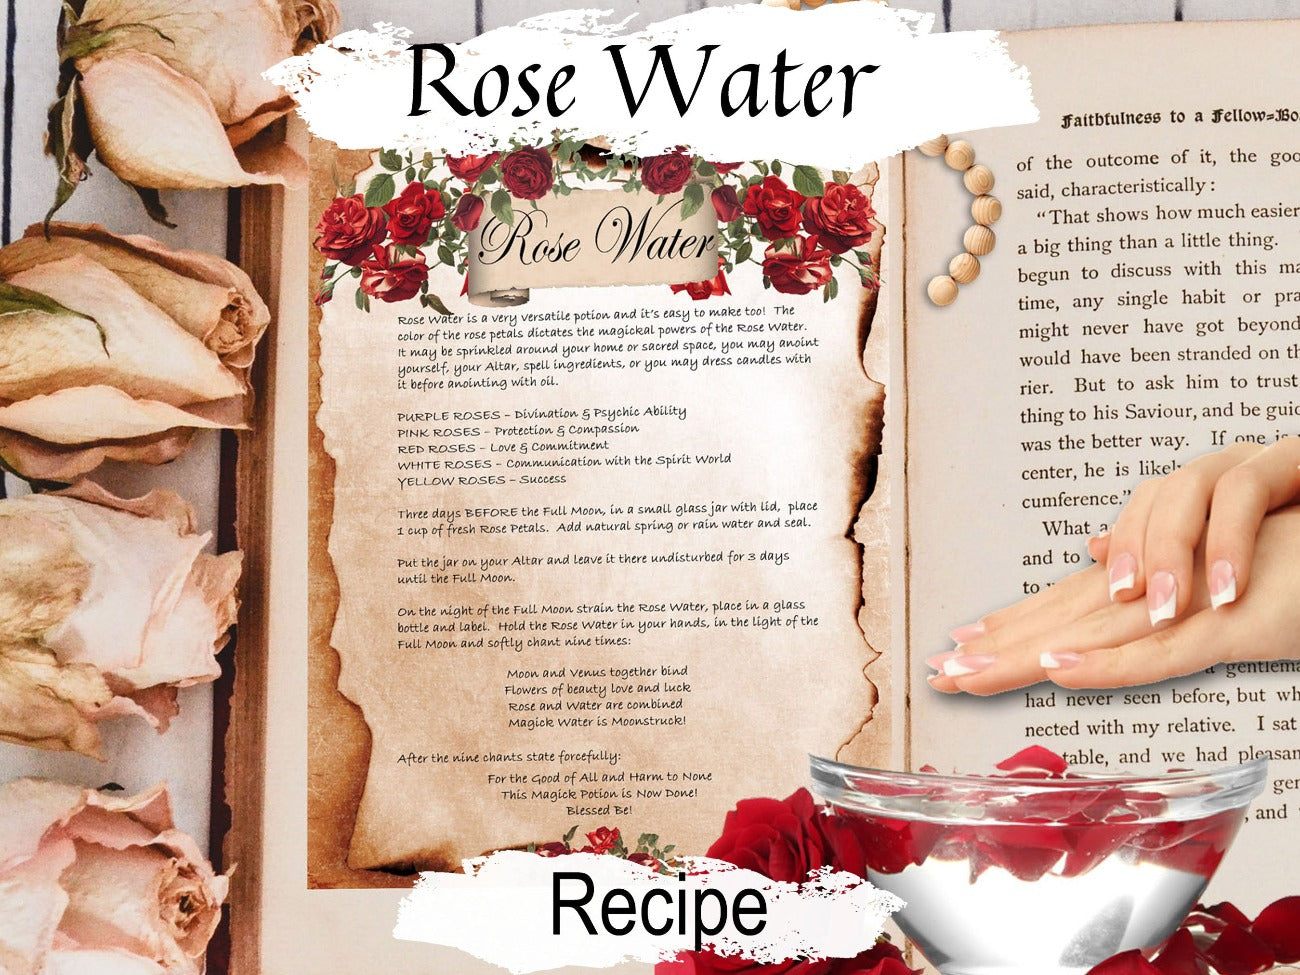 ROSE WATER POTION, Charmed Style Potion Spell, Homemade Rose Water, Beauty Spell, Briar Rose Potion, Witch Witchcraft Magic Love Recipe - Morgana Magick Spell